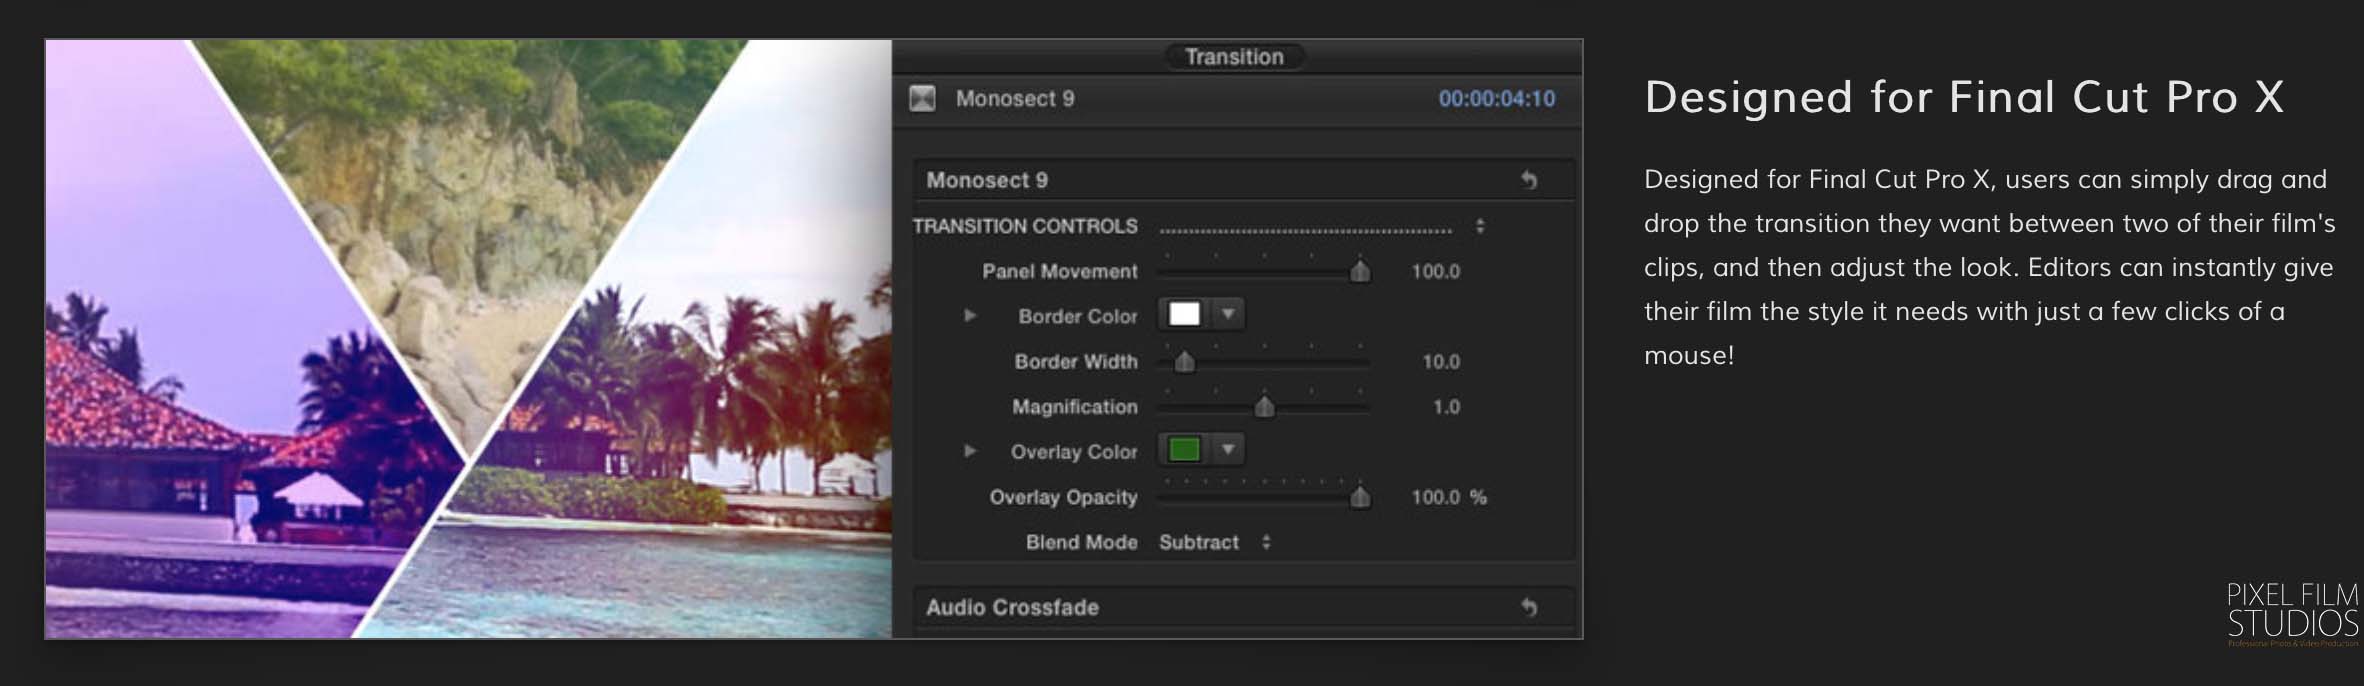 TranSlice Perspective Transition Pack for Final Cut Pro X from Pixel Film Studios